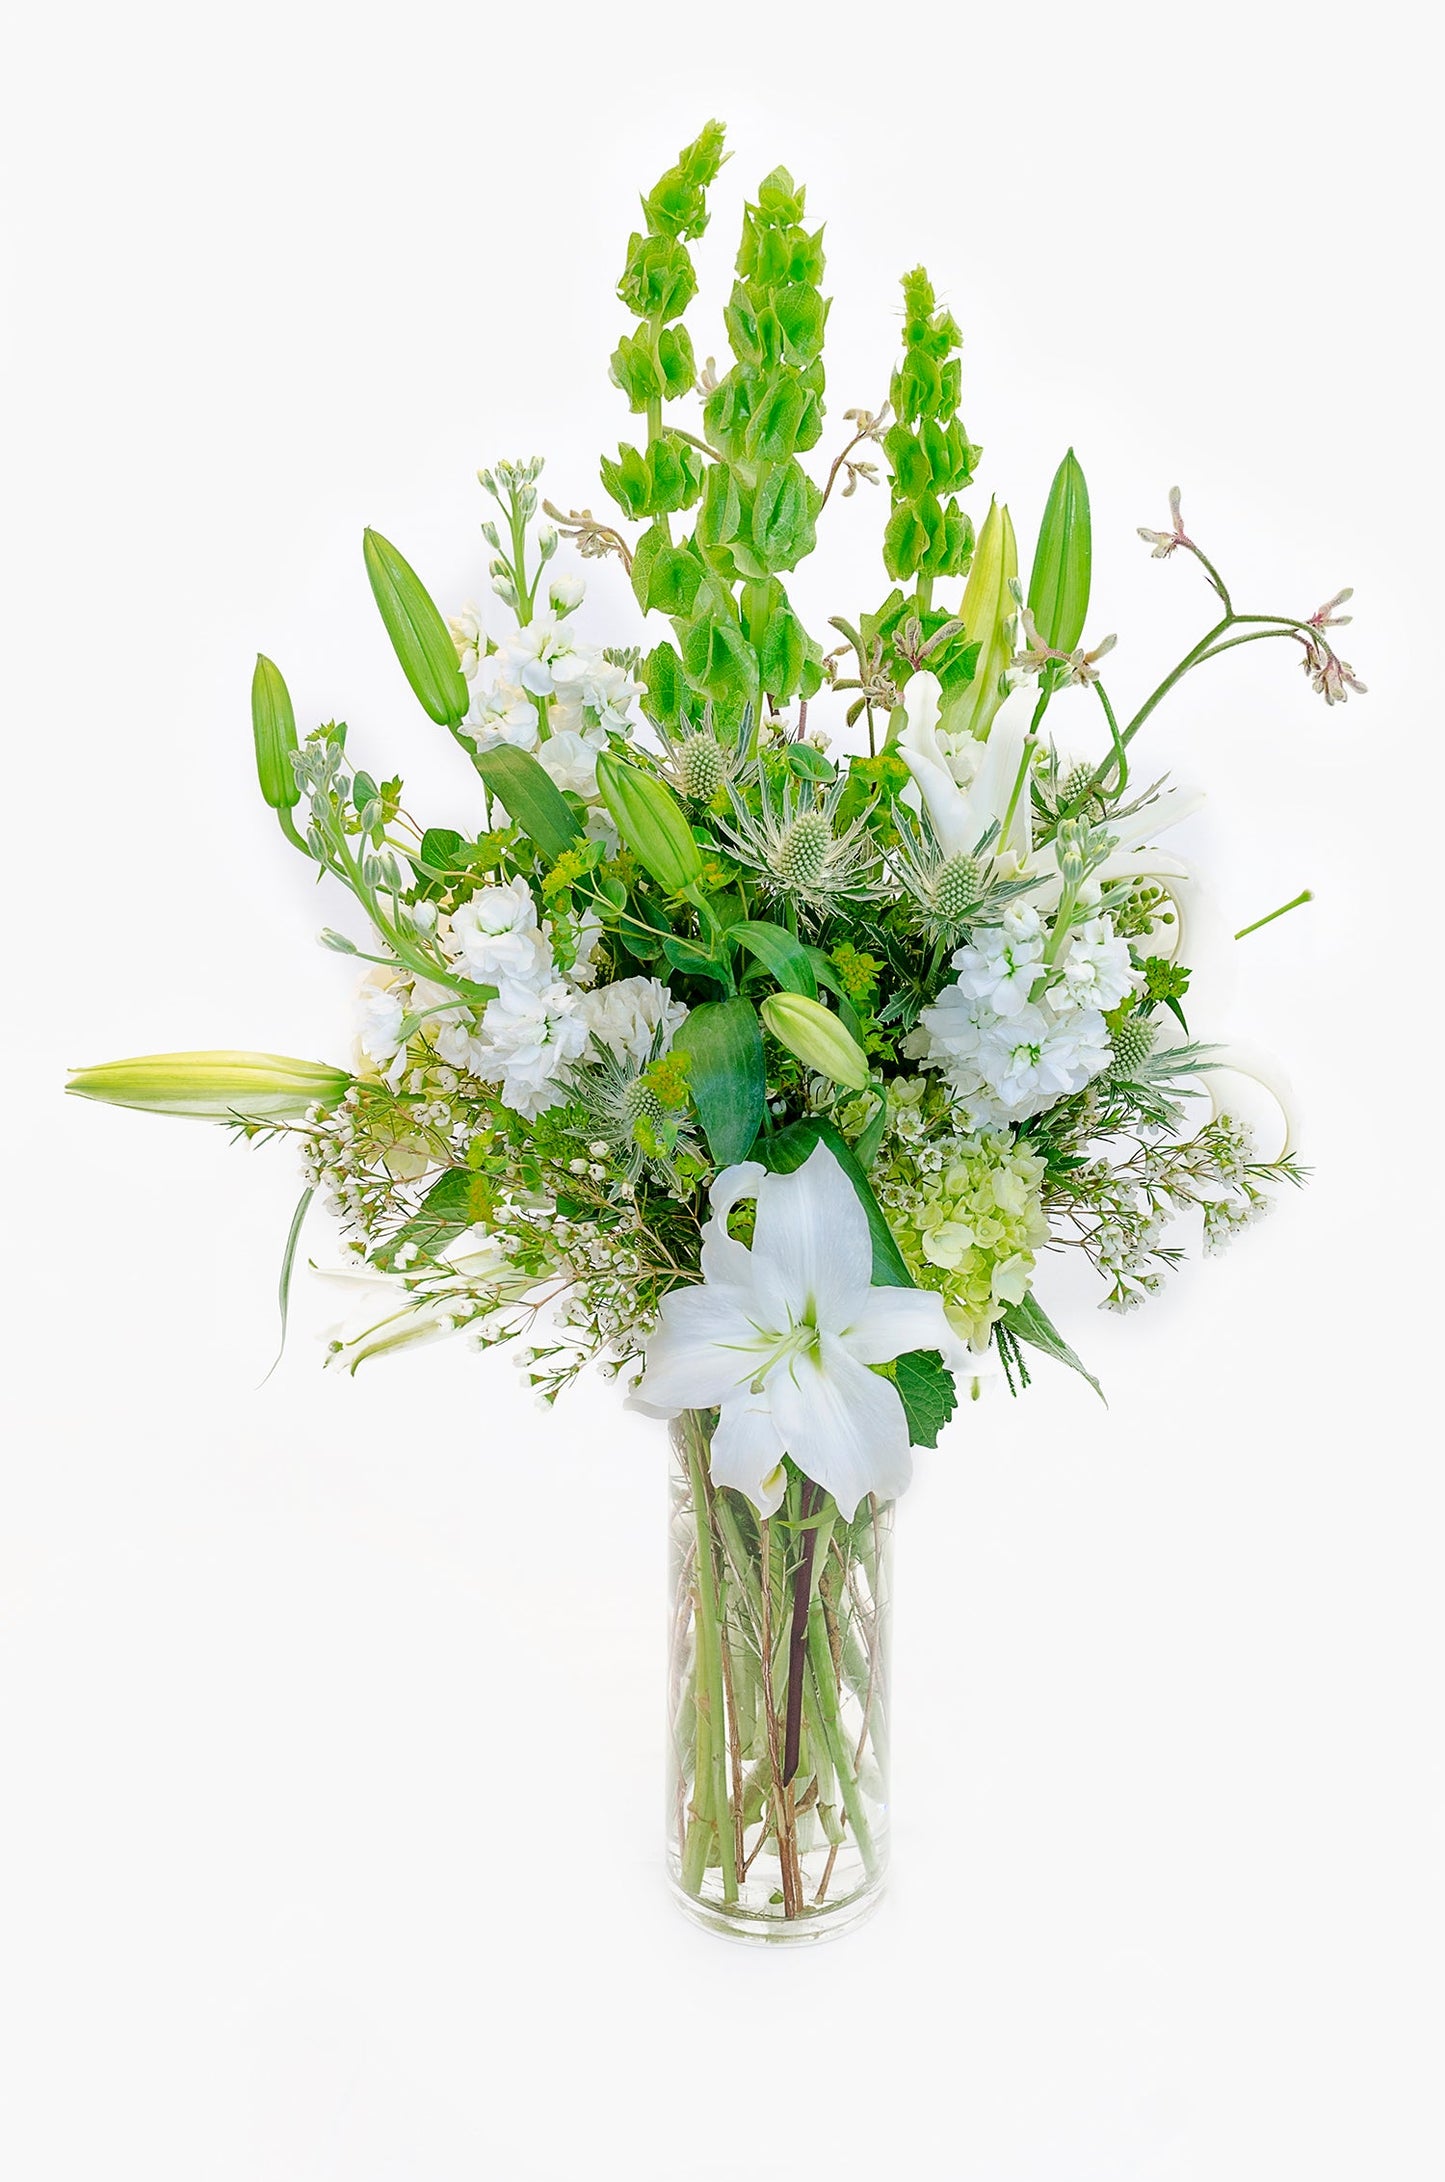 Gifts for Mom - Fresh Florals